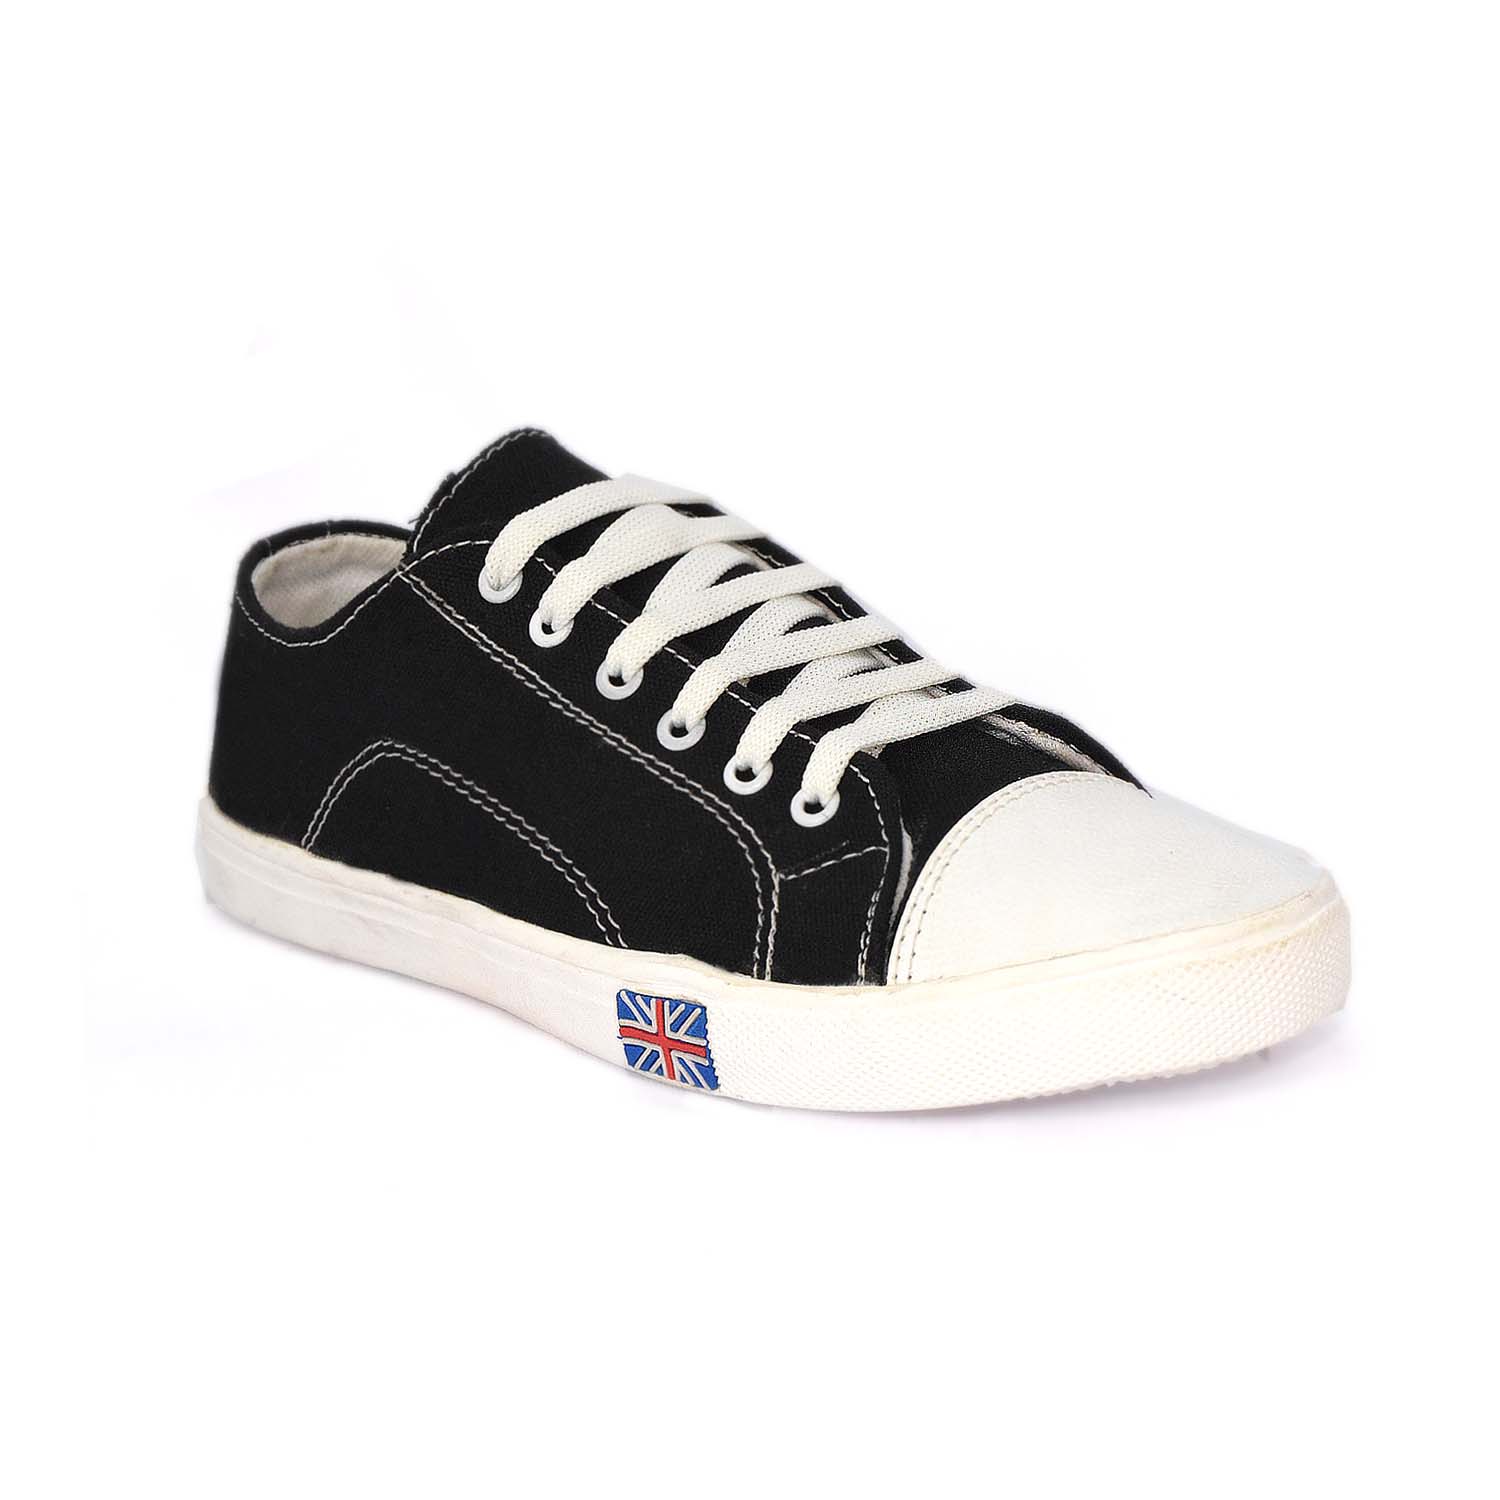 Buy ADX Jio Canvas Shoes Online @ ₹425 from ShopClues